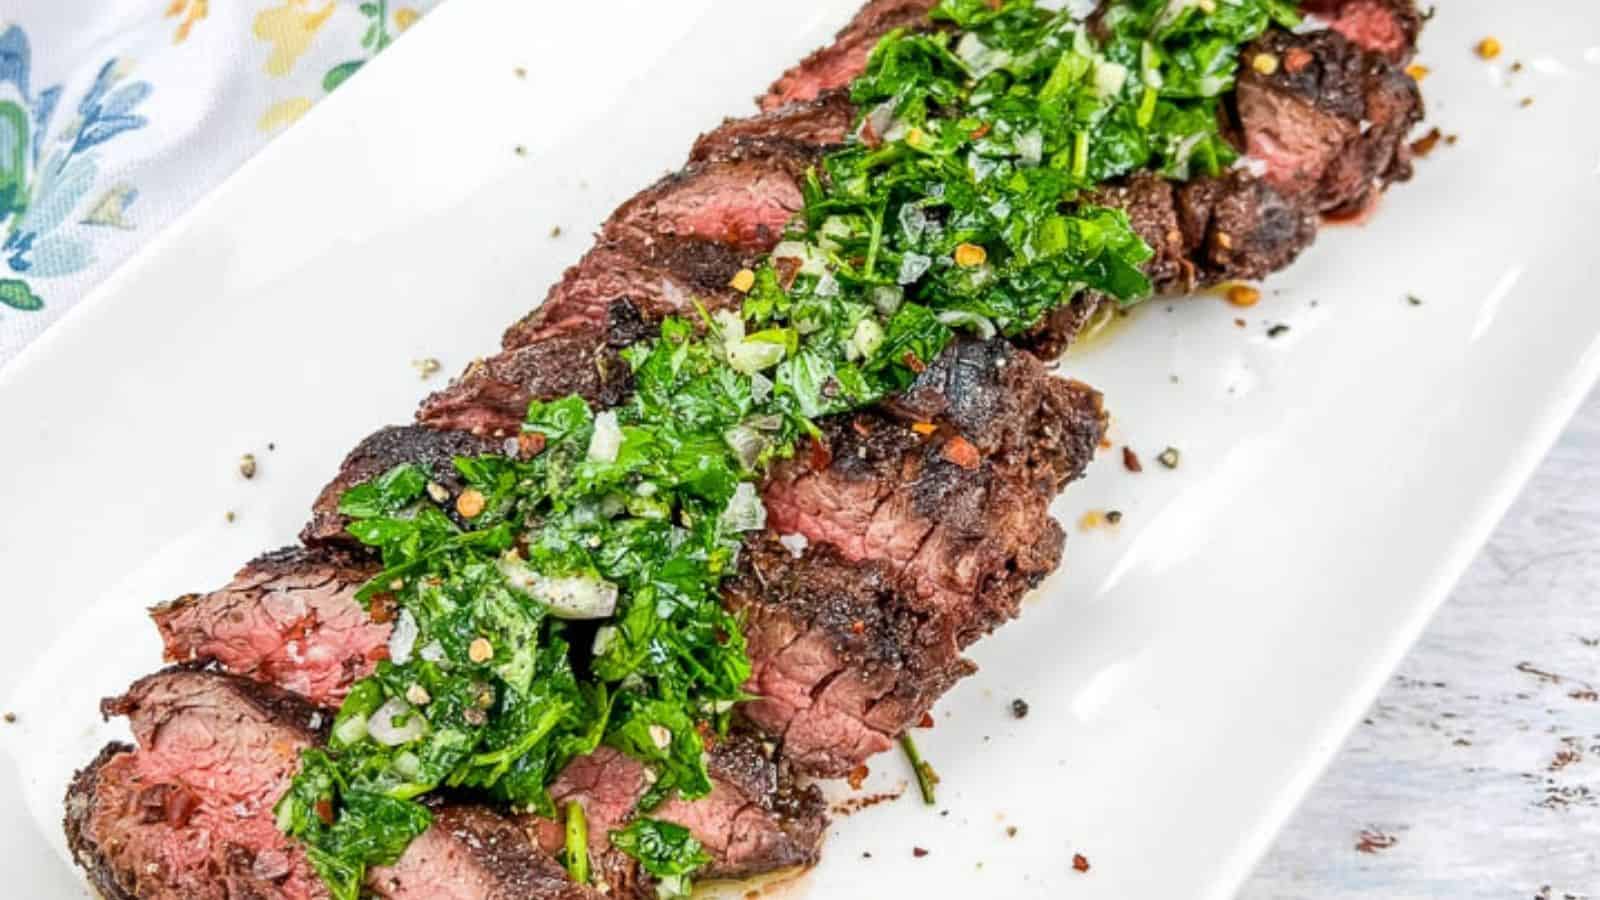 A plate of sliced grilled steak topped with a green herb sauce, served on a white rectangular dish.